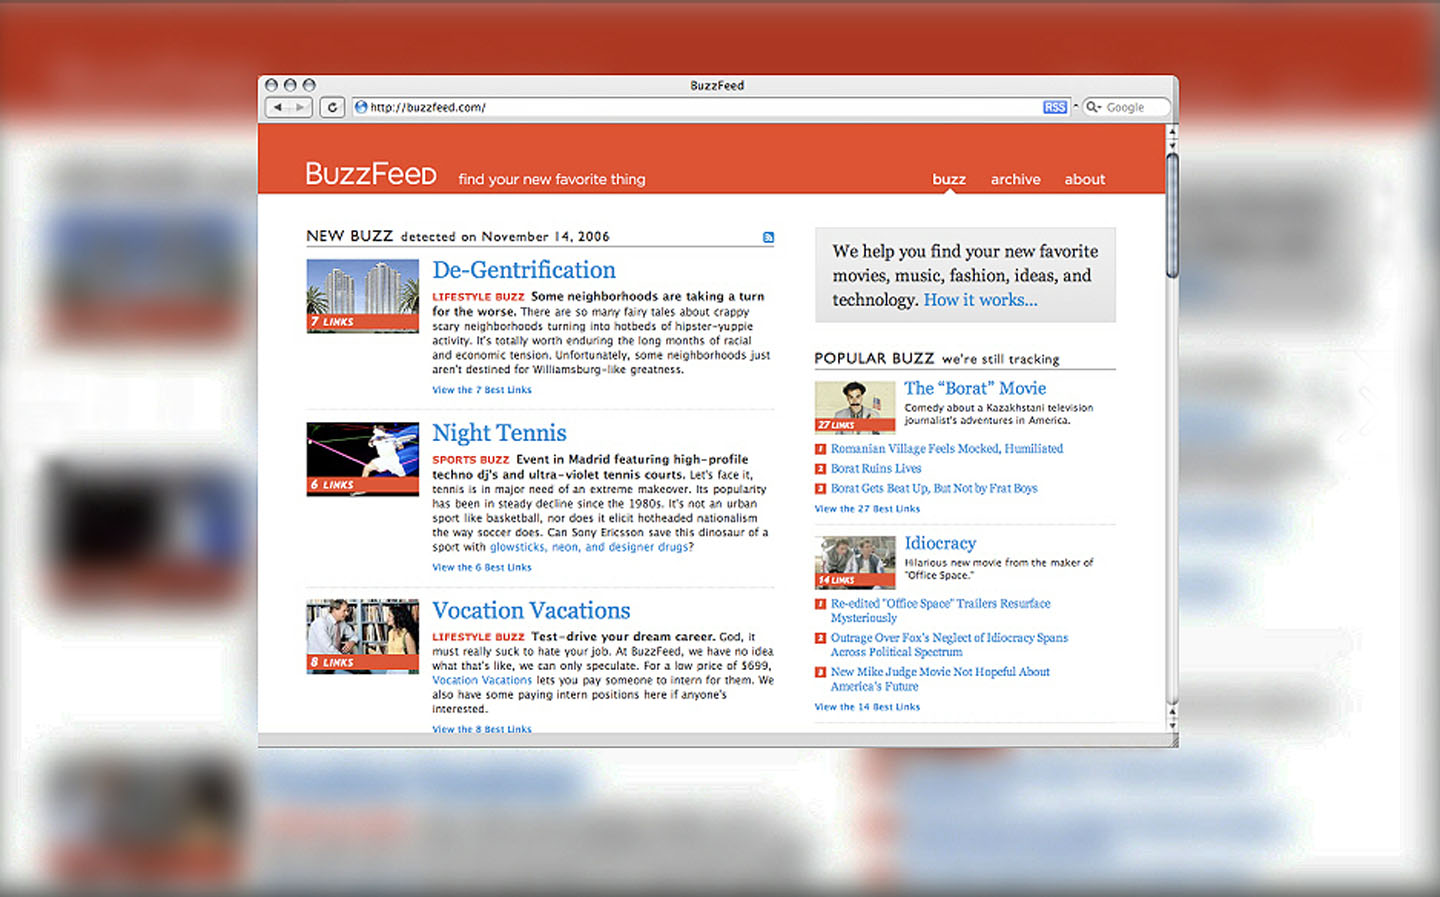 BuzzFeed's web face in 2006 was tame and conventional. That soon changed.